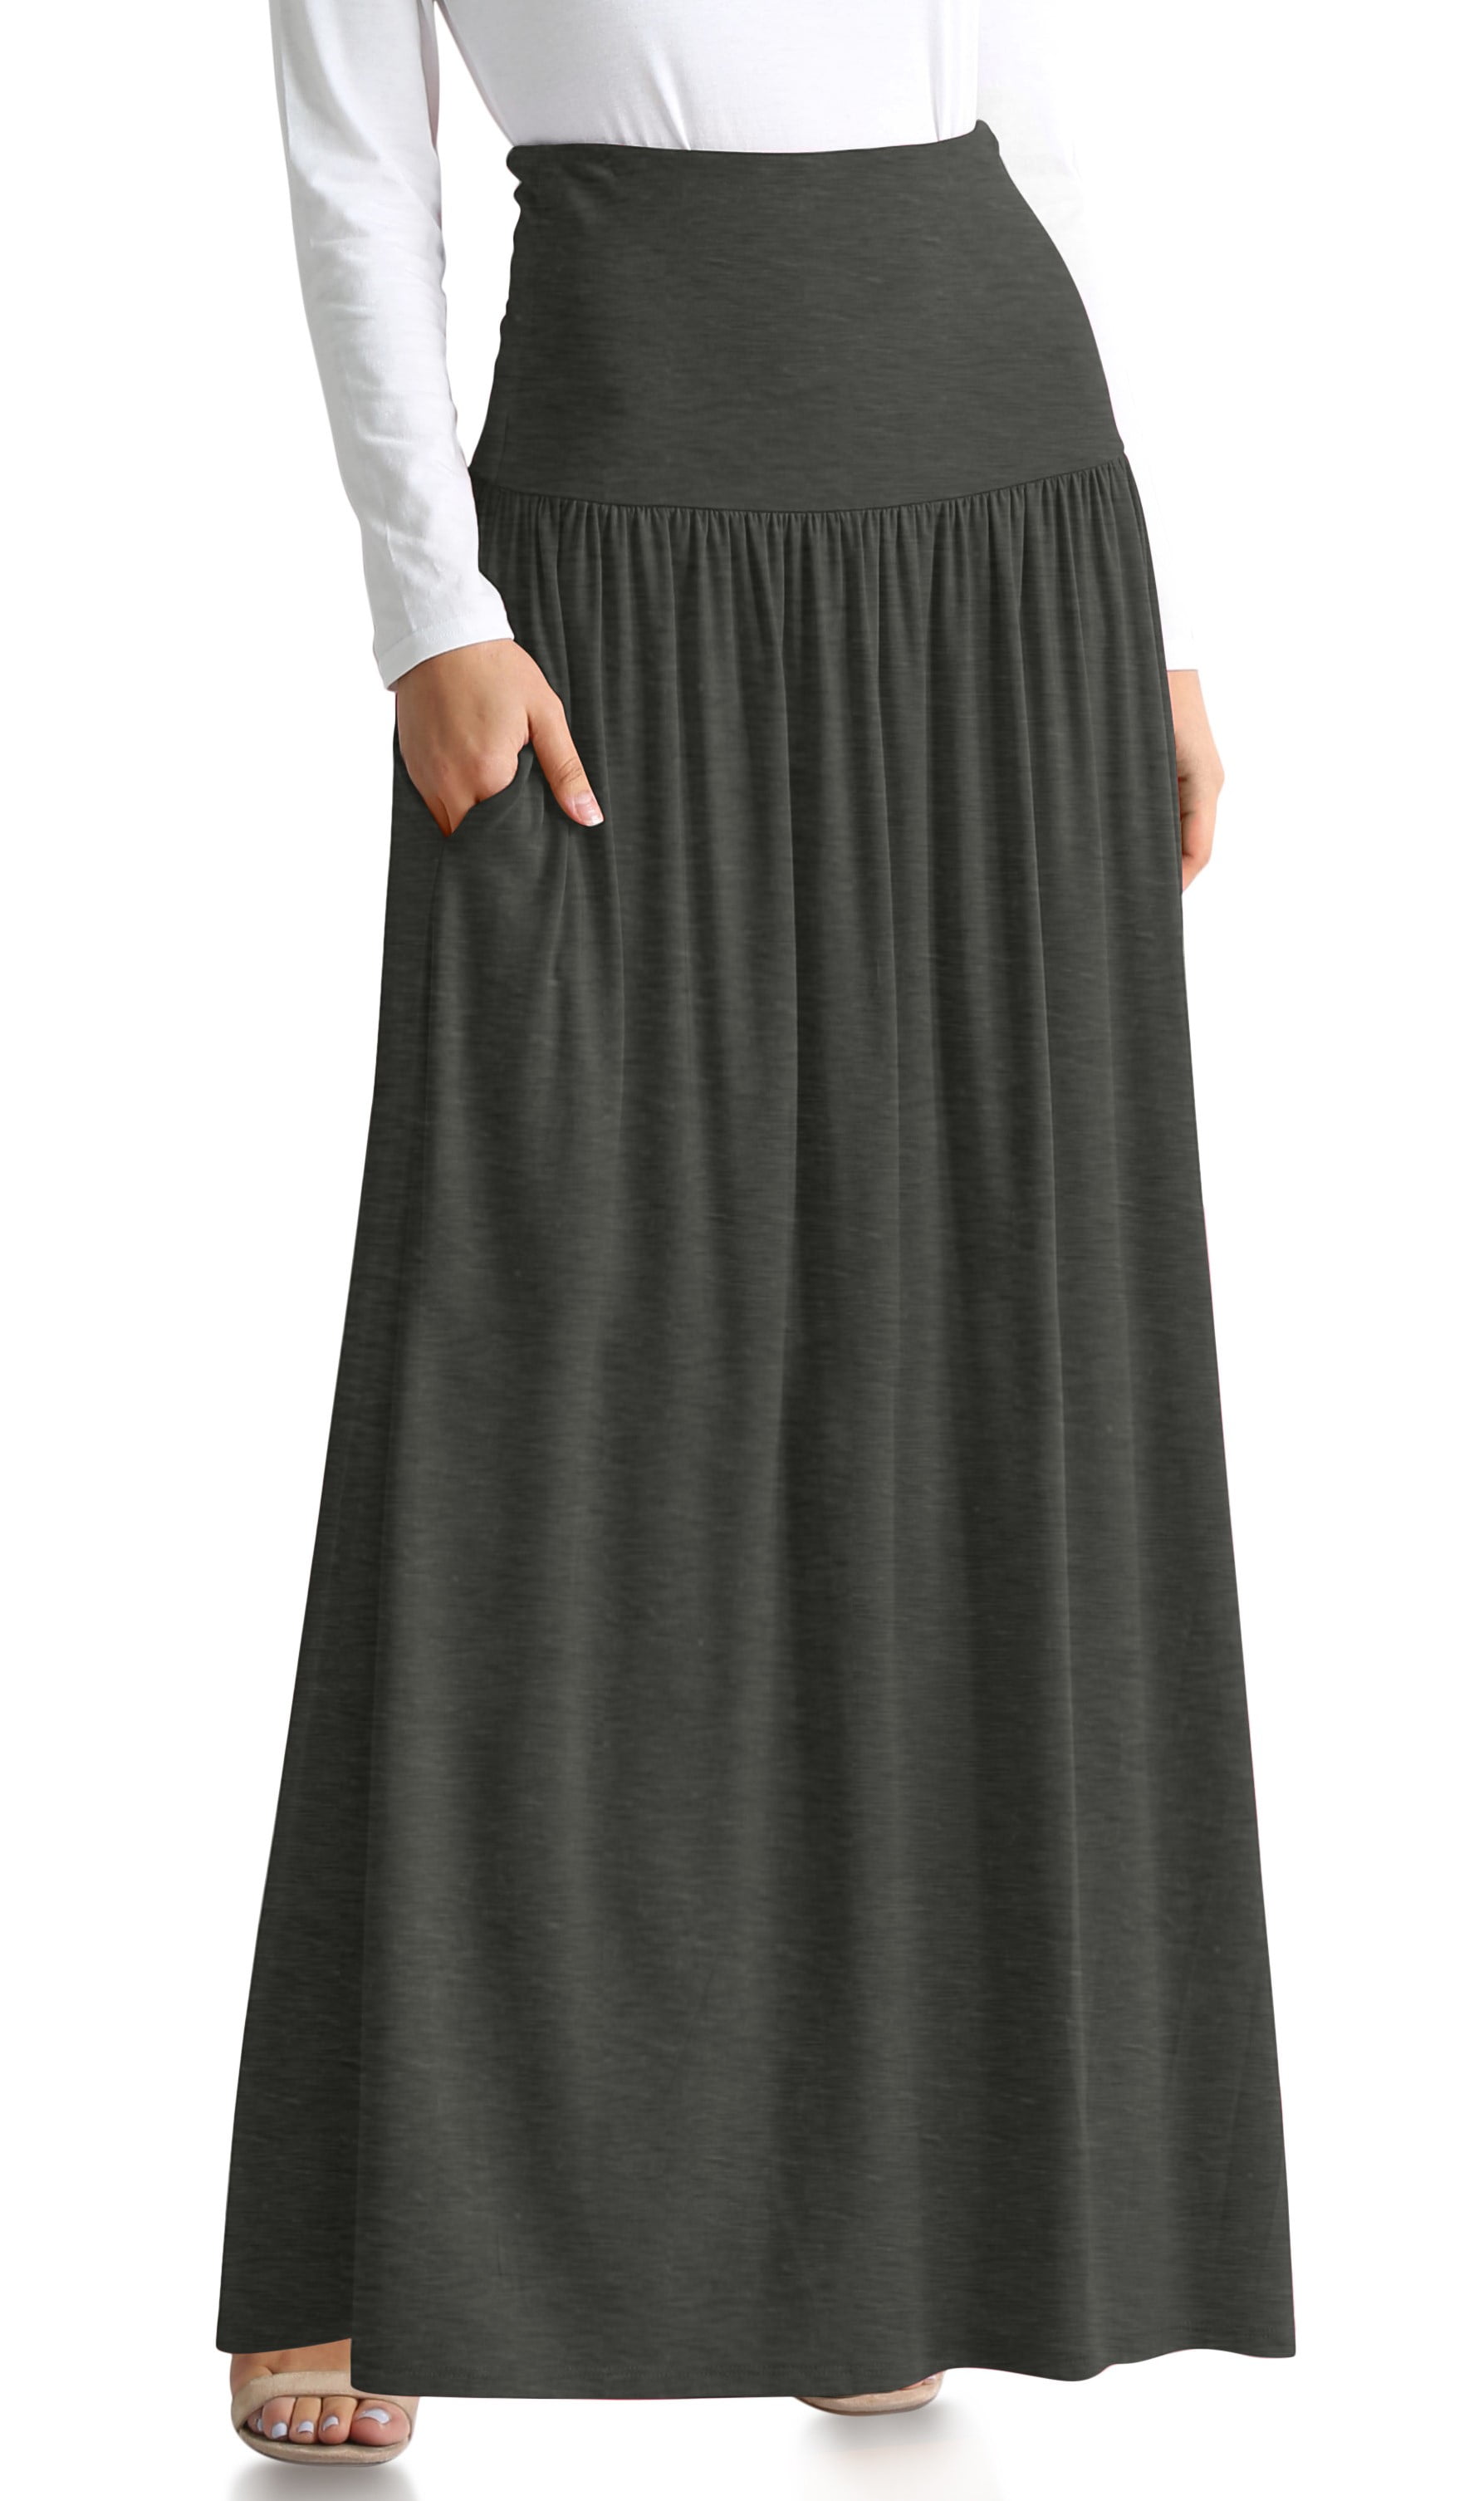 Simlu Womens Long Maxi Skirt with Pockets Reg and Plus Size